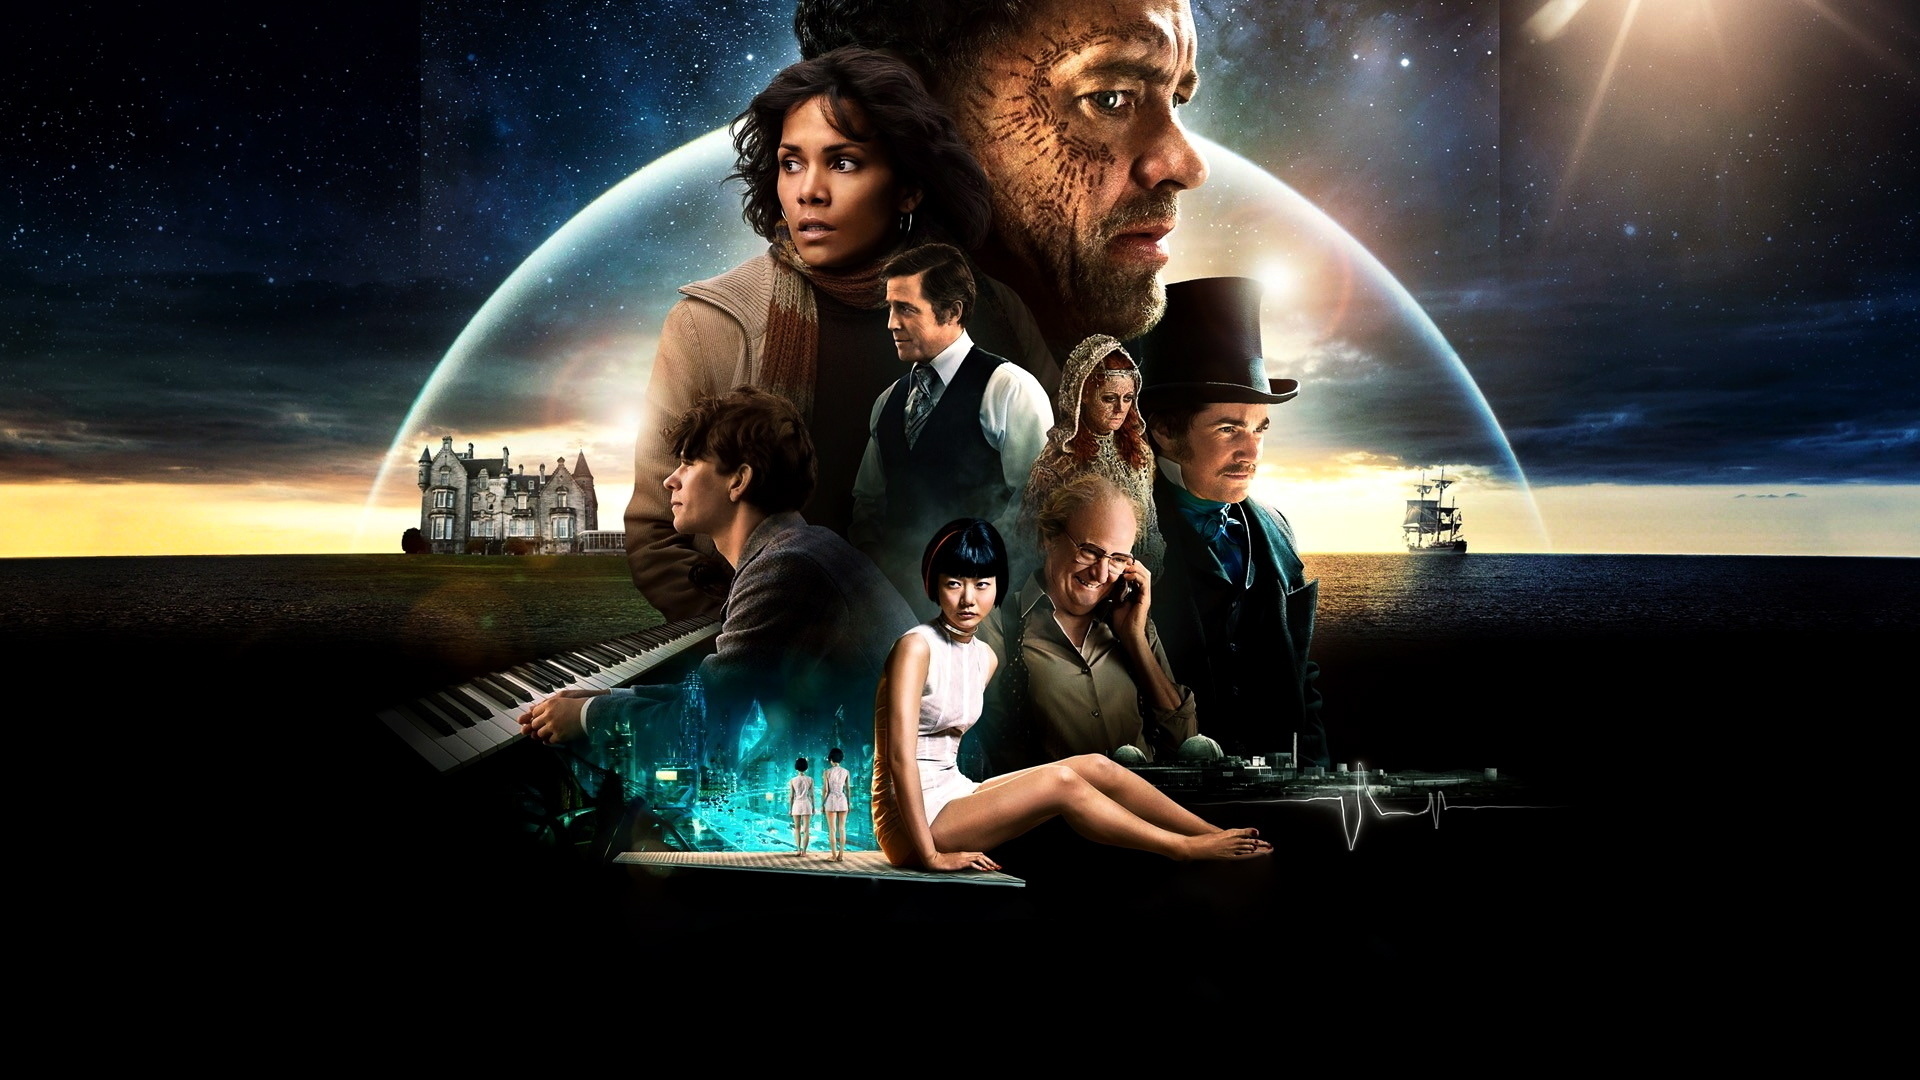 Cloud Atlas: The film was named "Worst Movie of 2012" in Time Magazine's Top 10 list. 1920x1080 Full HD Background.